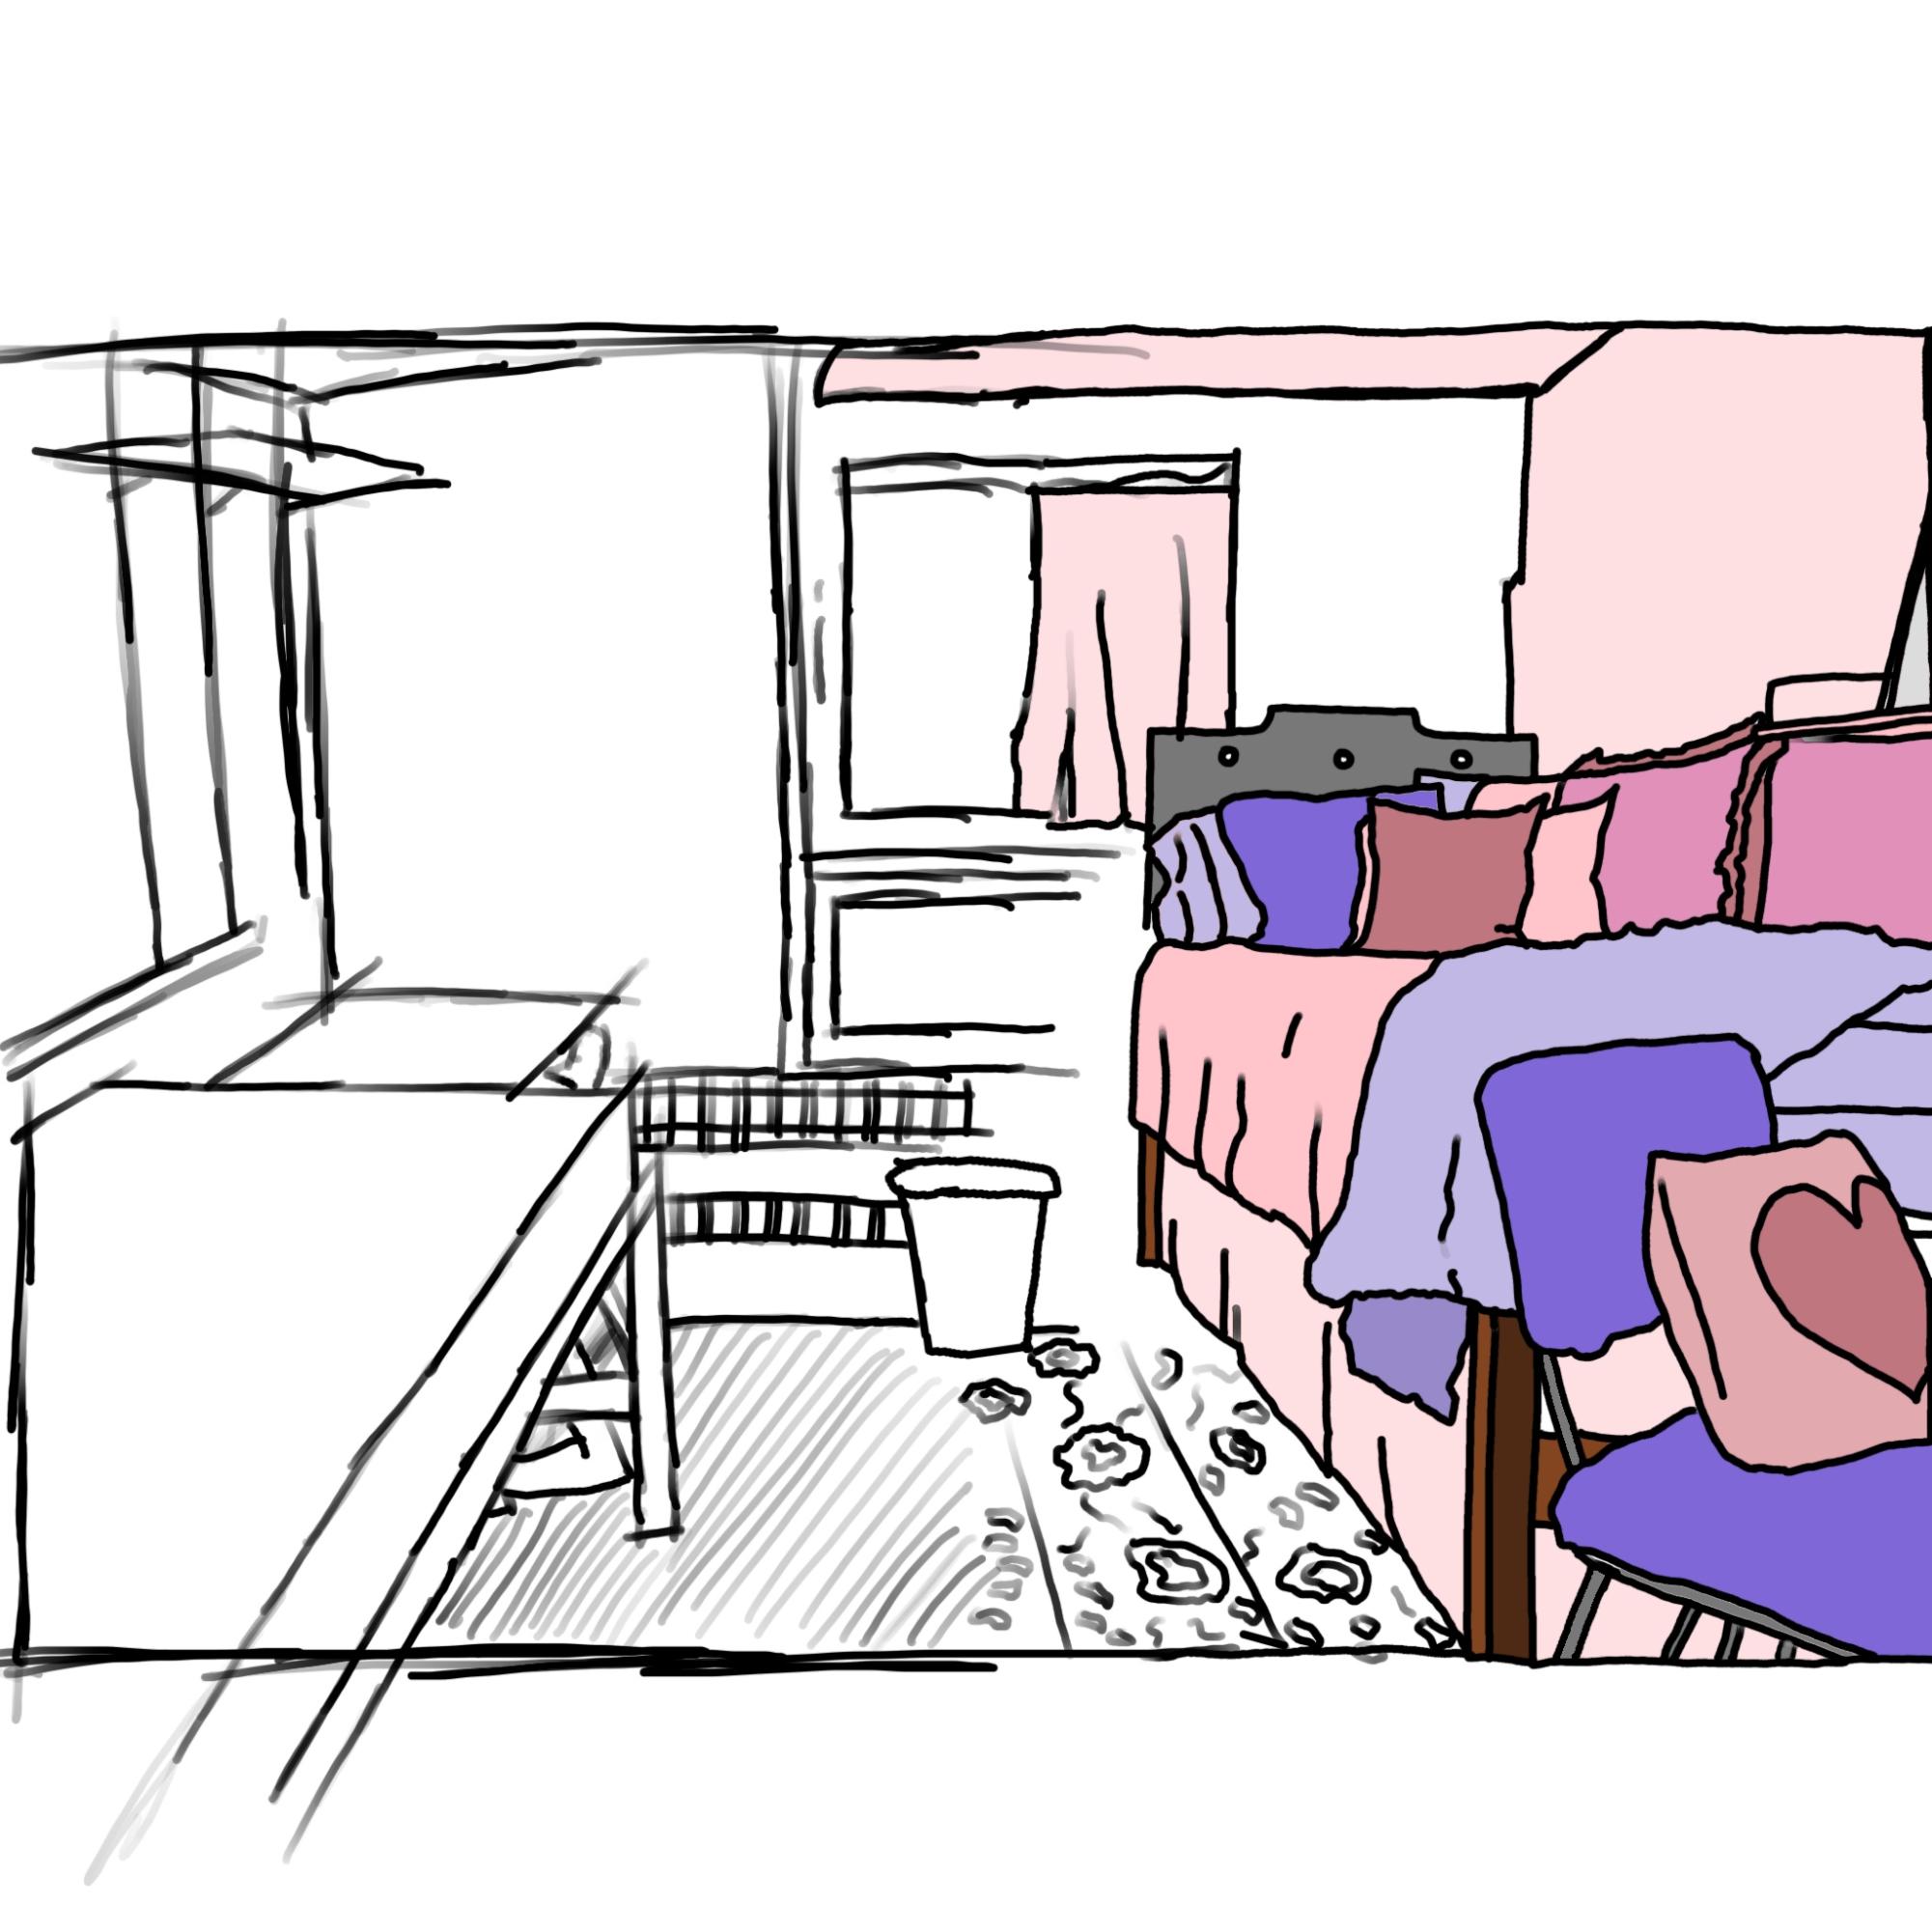 A dorm room is bare on the left side and overstuffed on the right side.